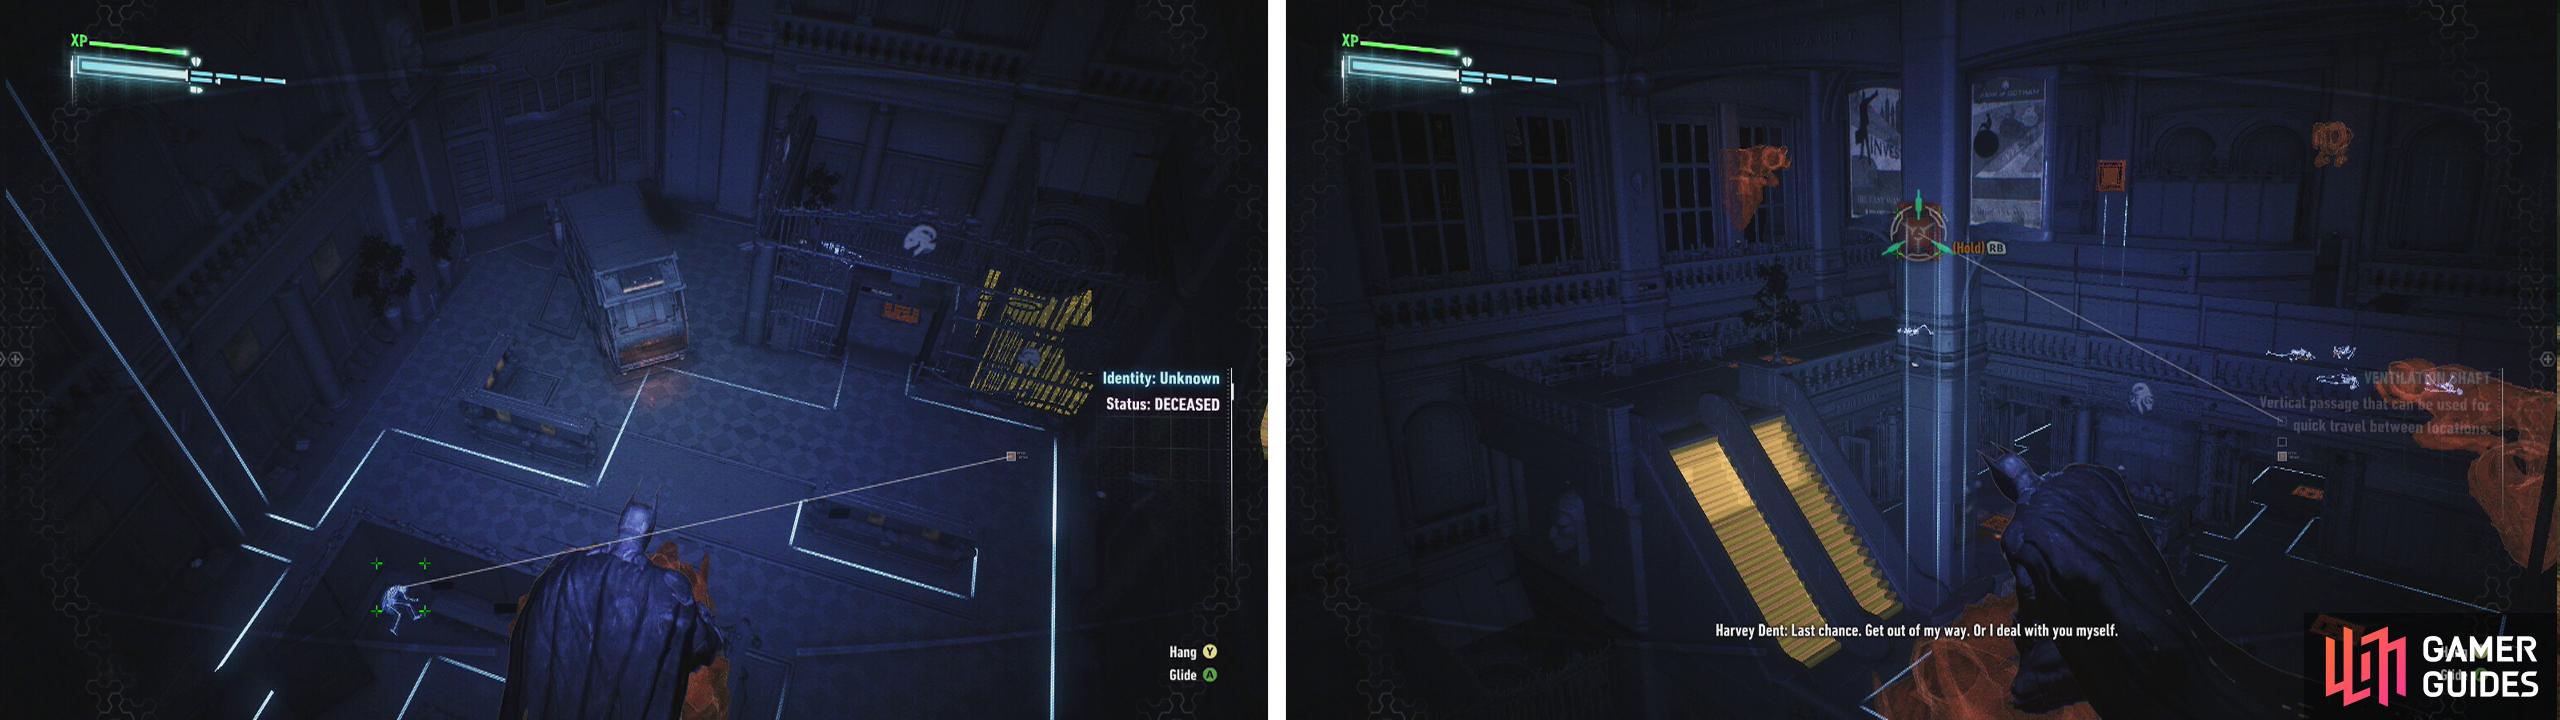 The tunnels by the truck and vaults are a great place to pick off enemies (left). We can also use the escalators as distractions (right).